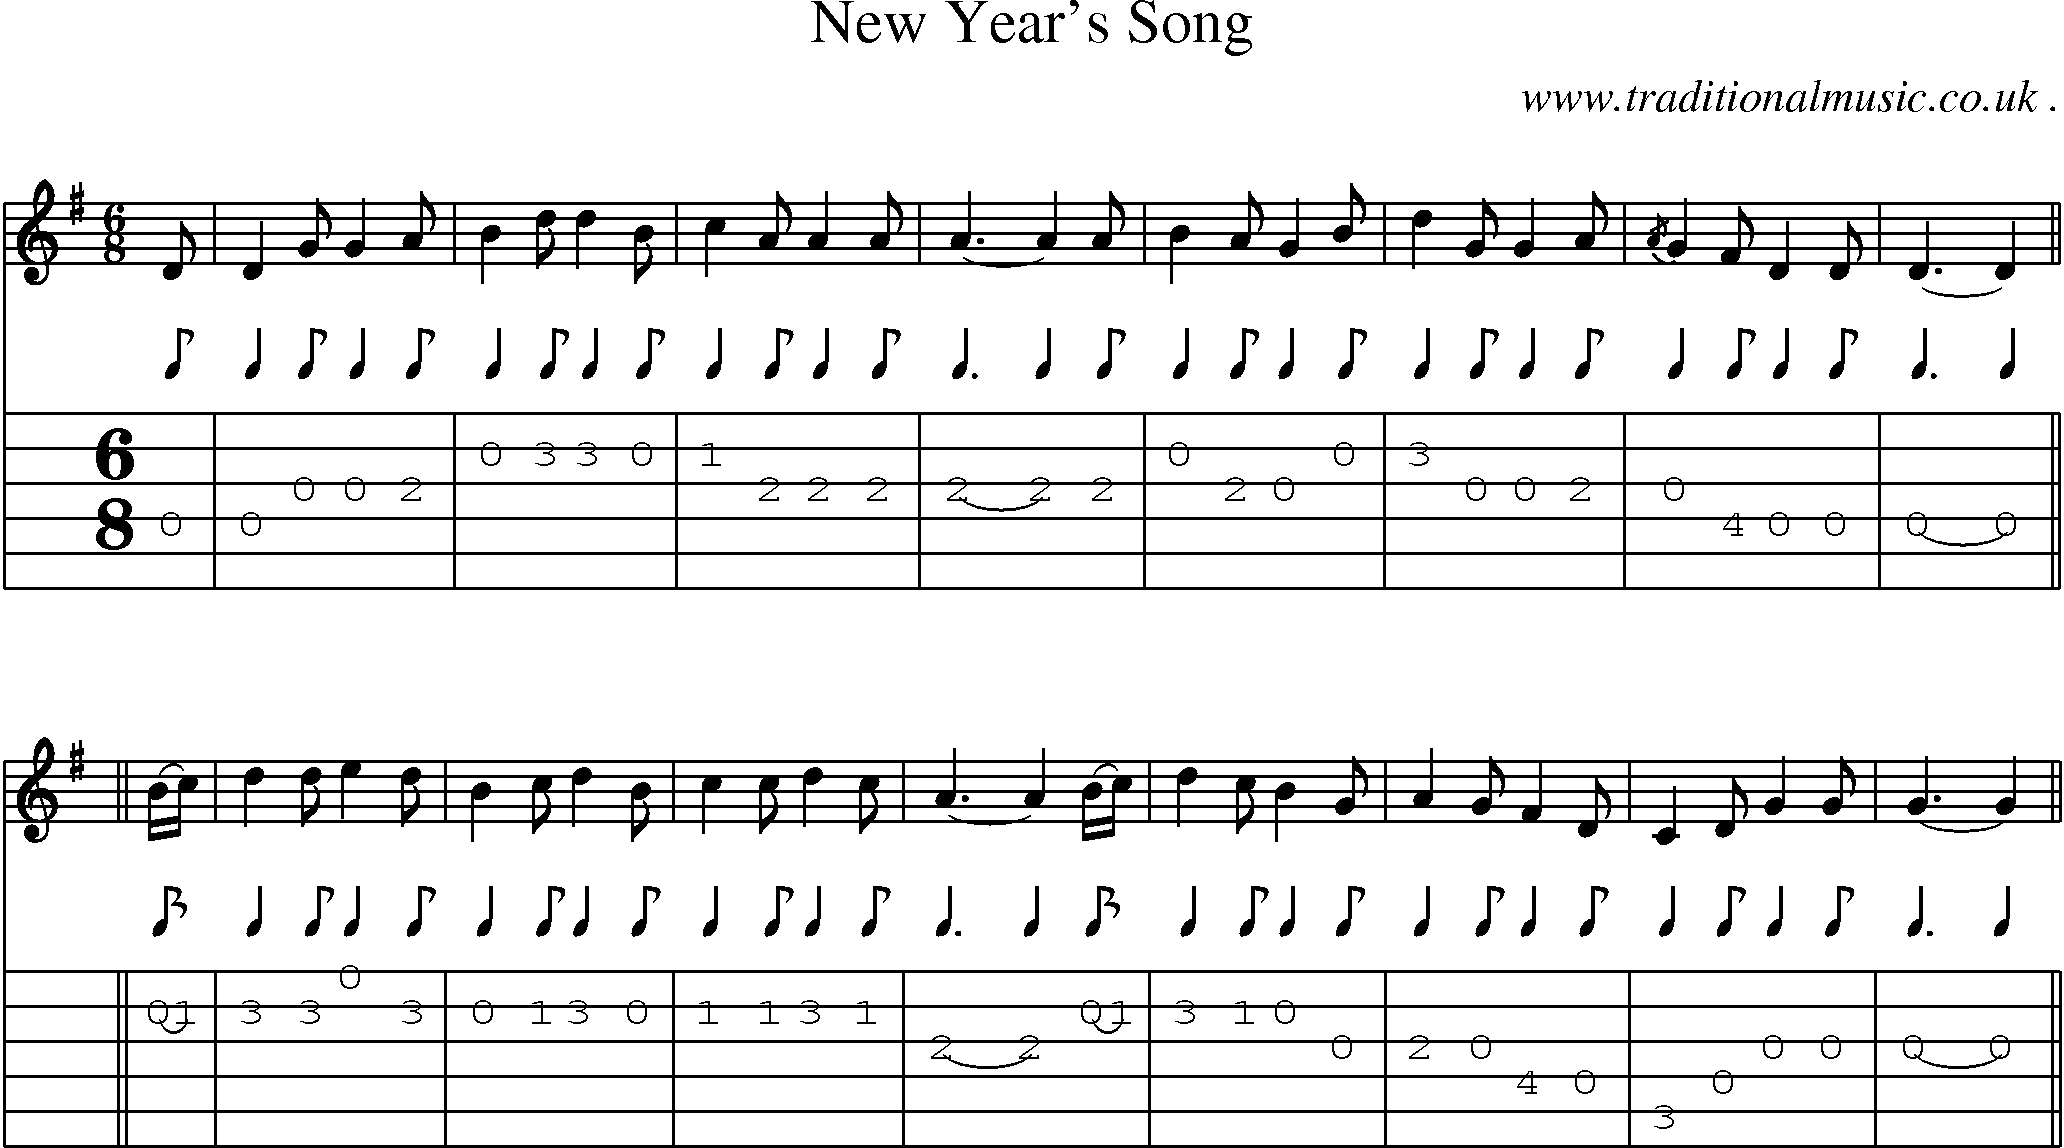 Sheet-music  score, Chords and Guitar Tabs for New Years Song